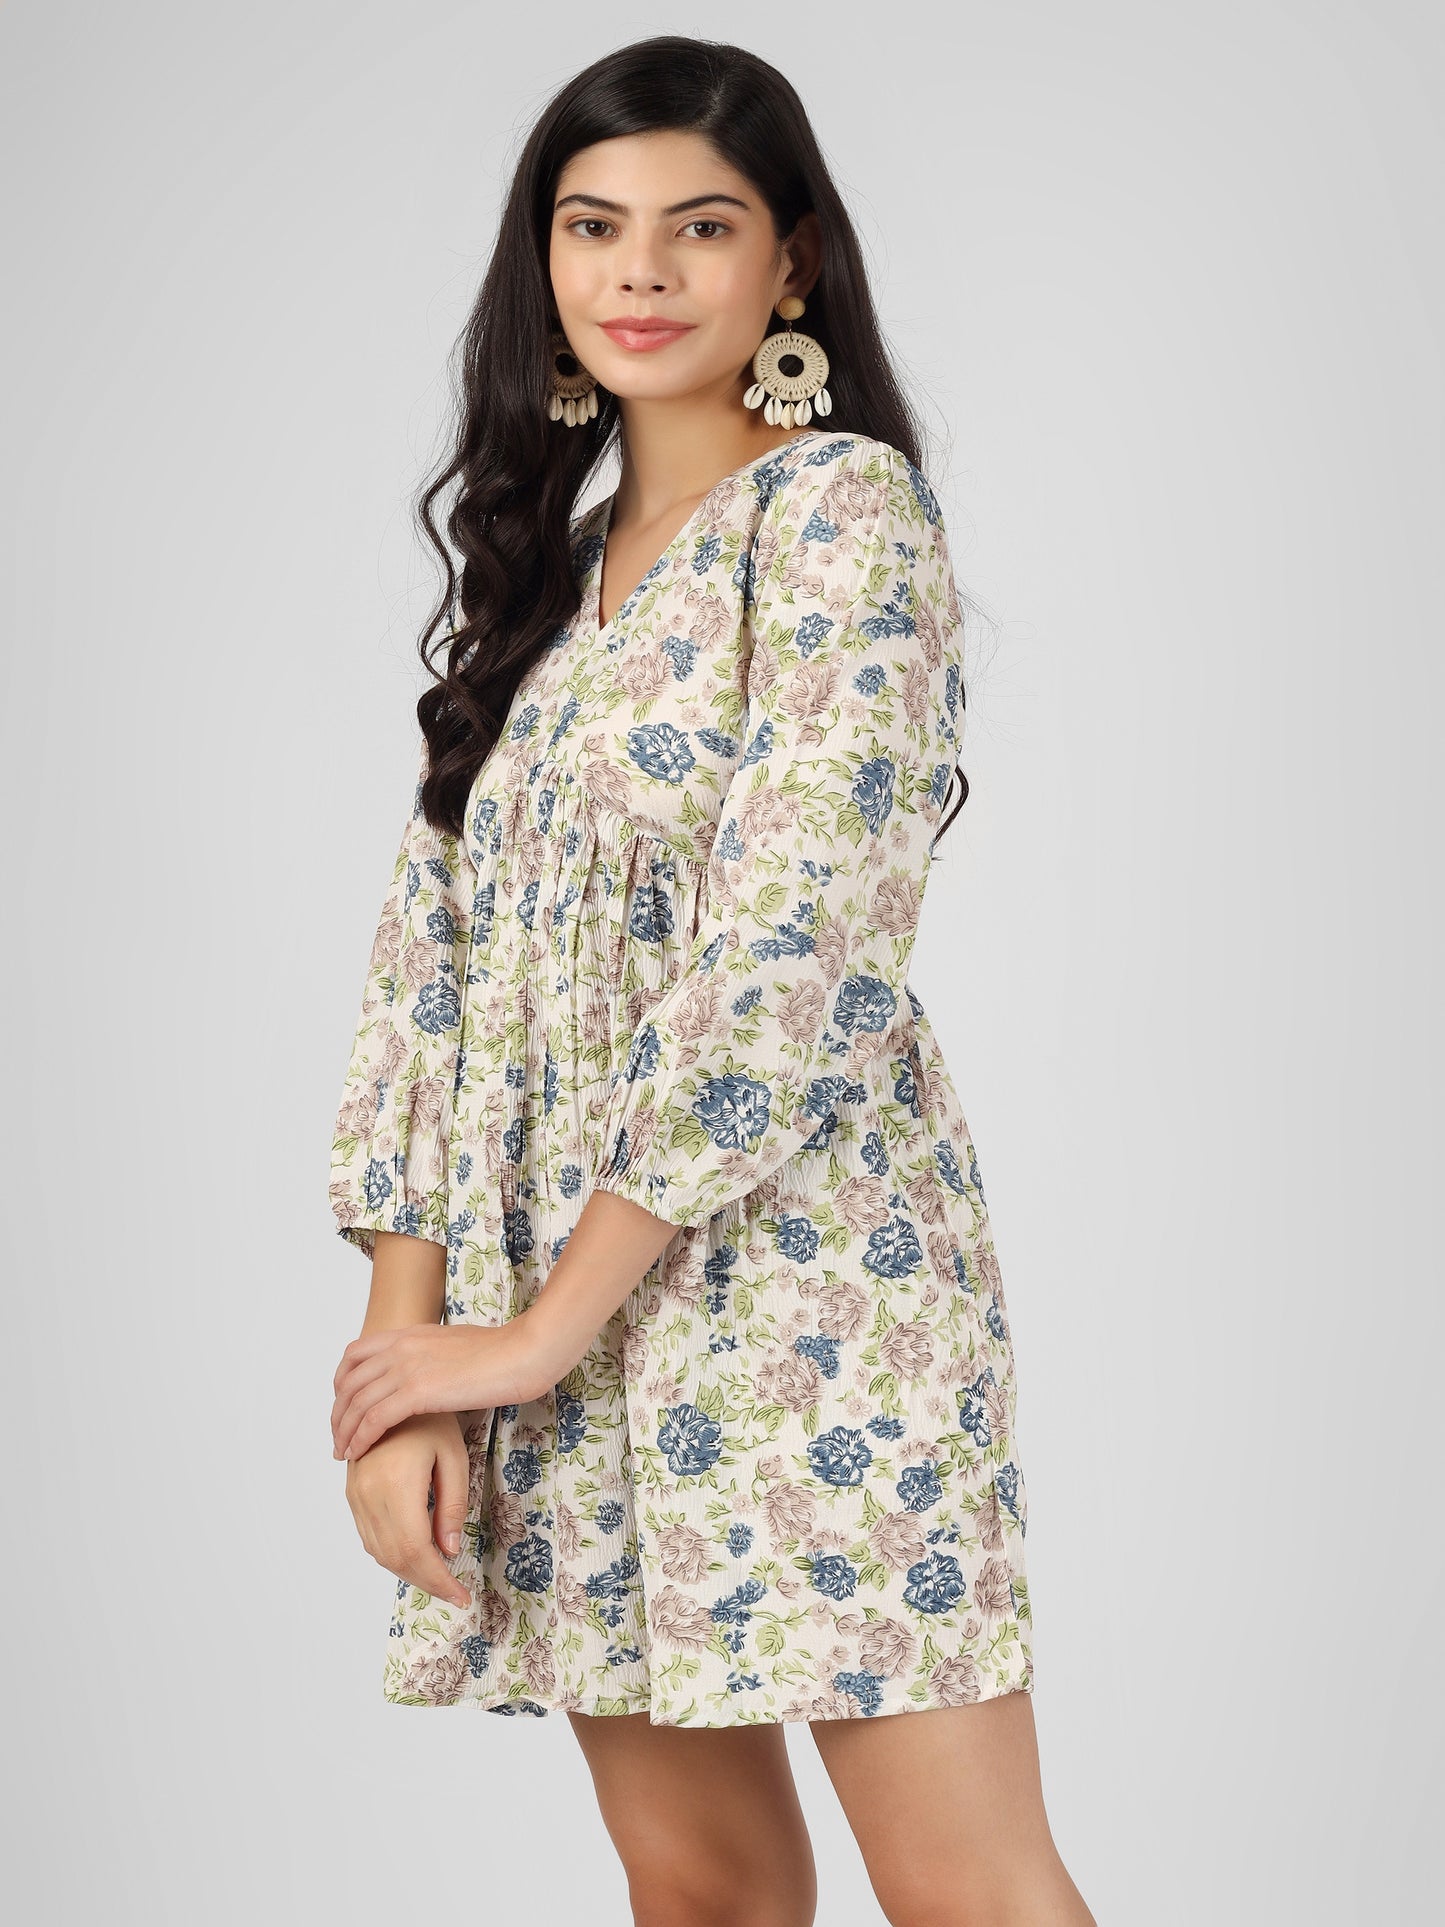 Women's Pretty White Floral Printed Fit and Flare Dress